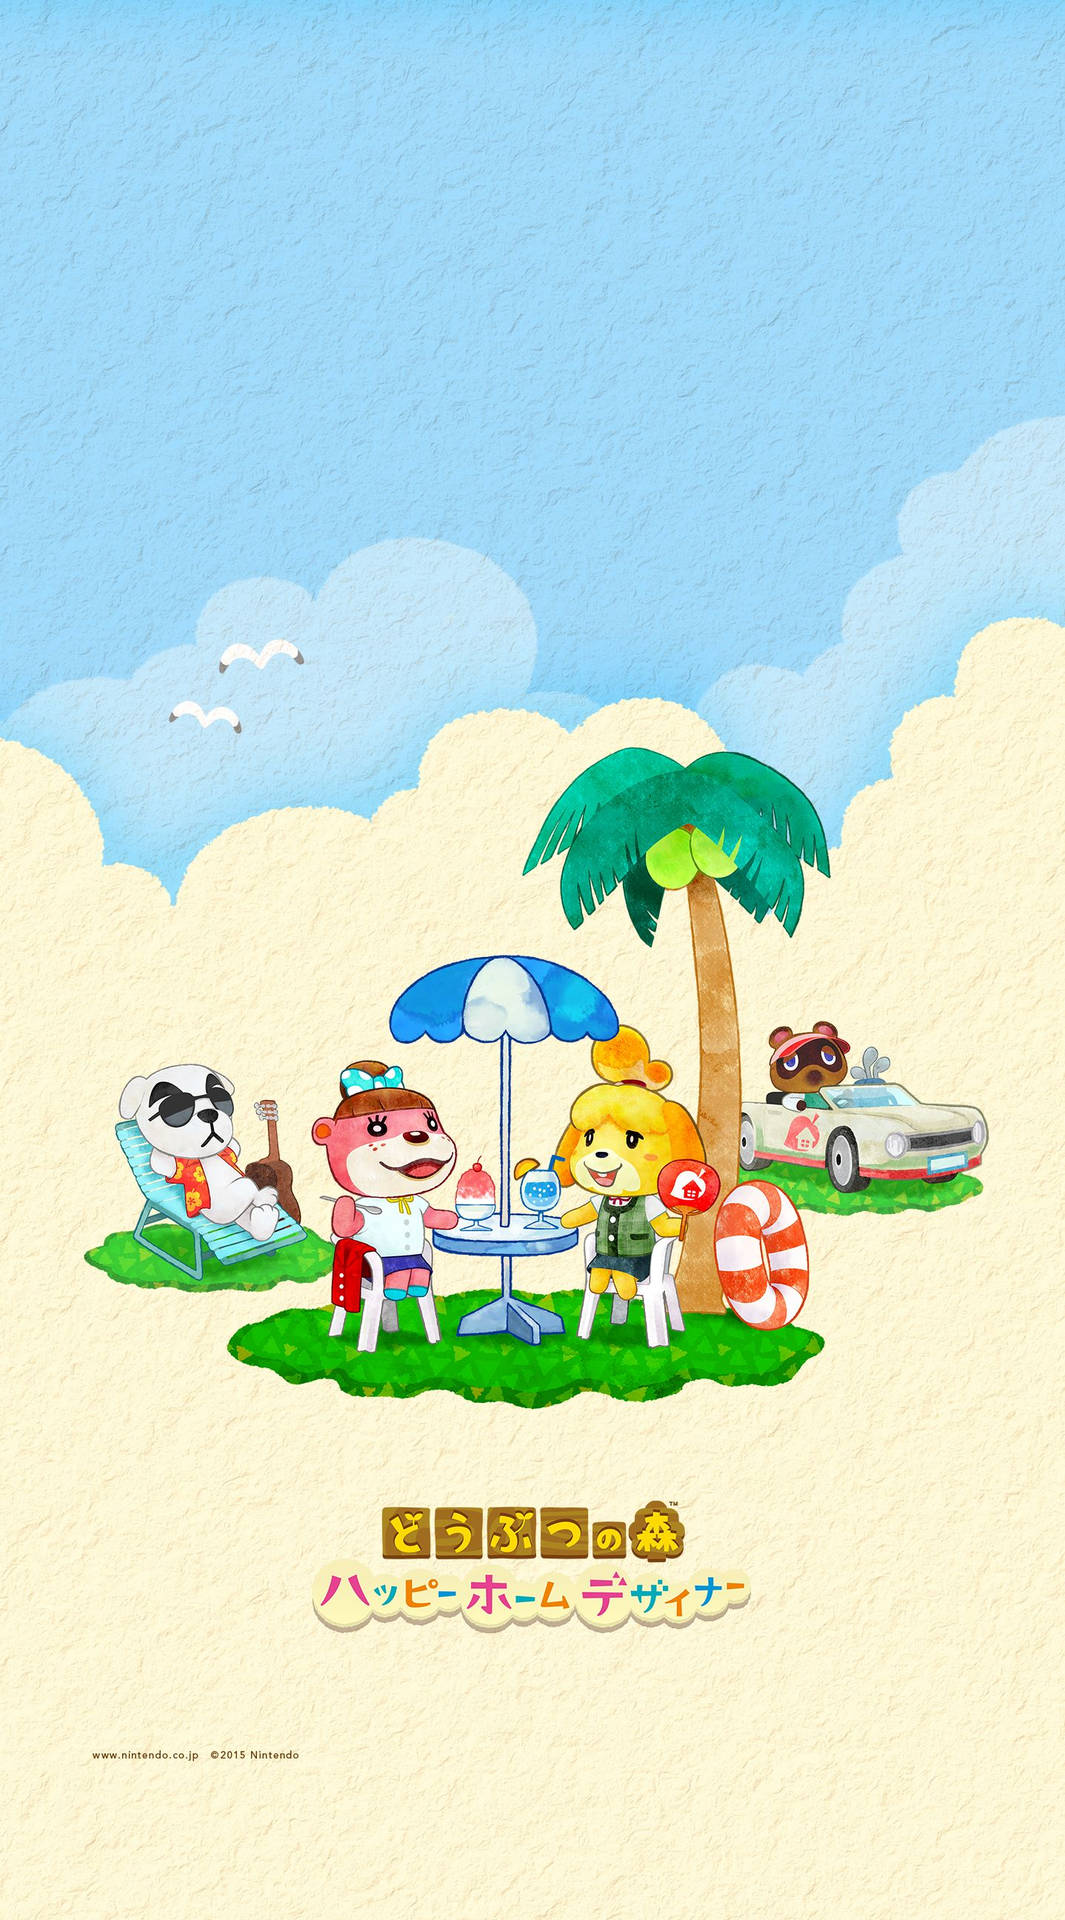 Life is a little more colorful with Animal Crossing’s beloved characters Wallpaper